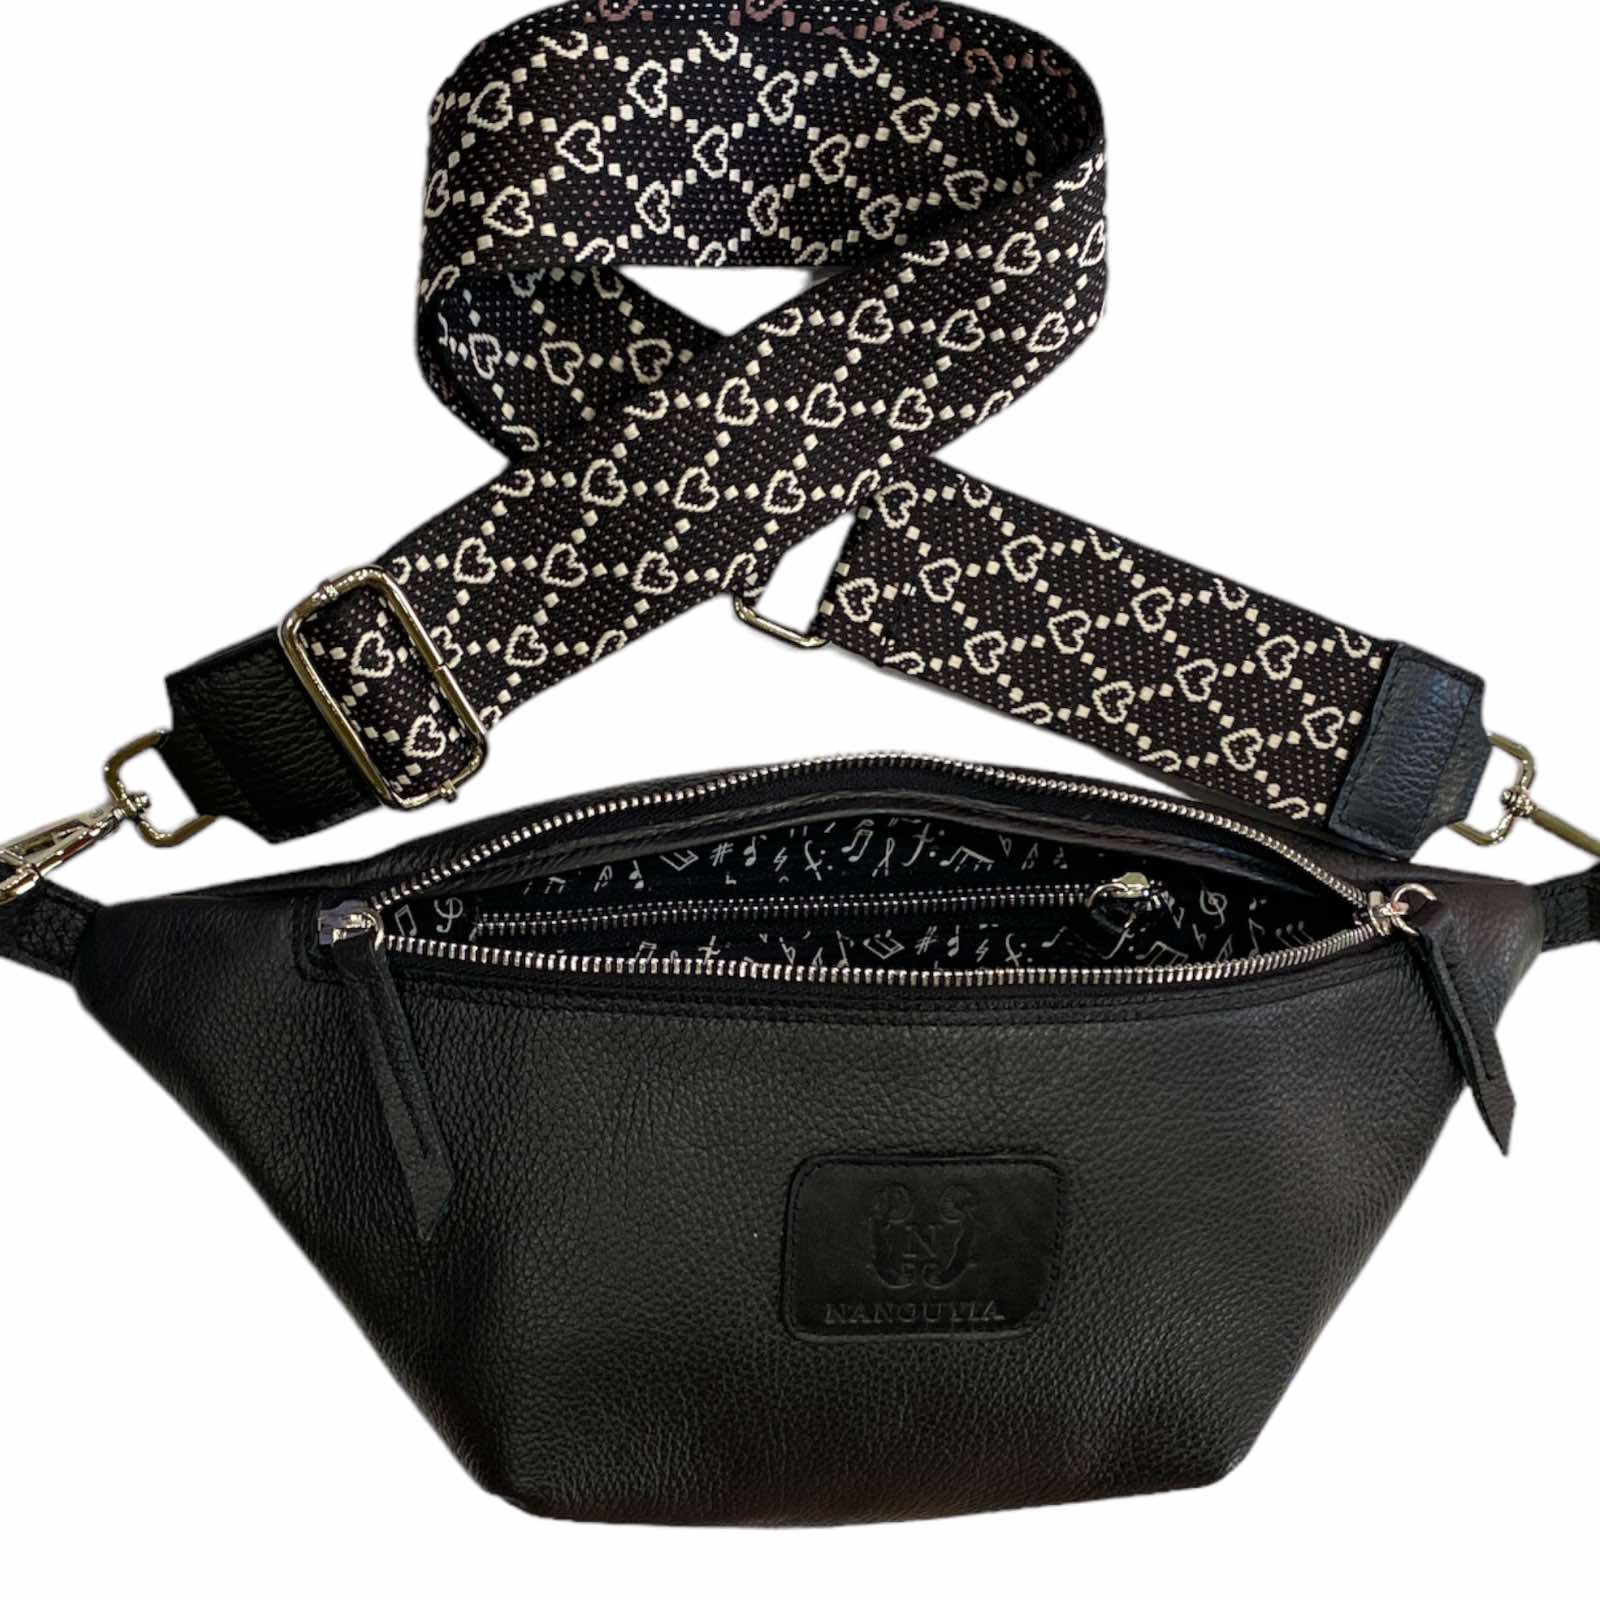 Black leather belt bag with silver metals